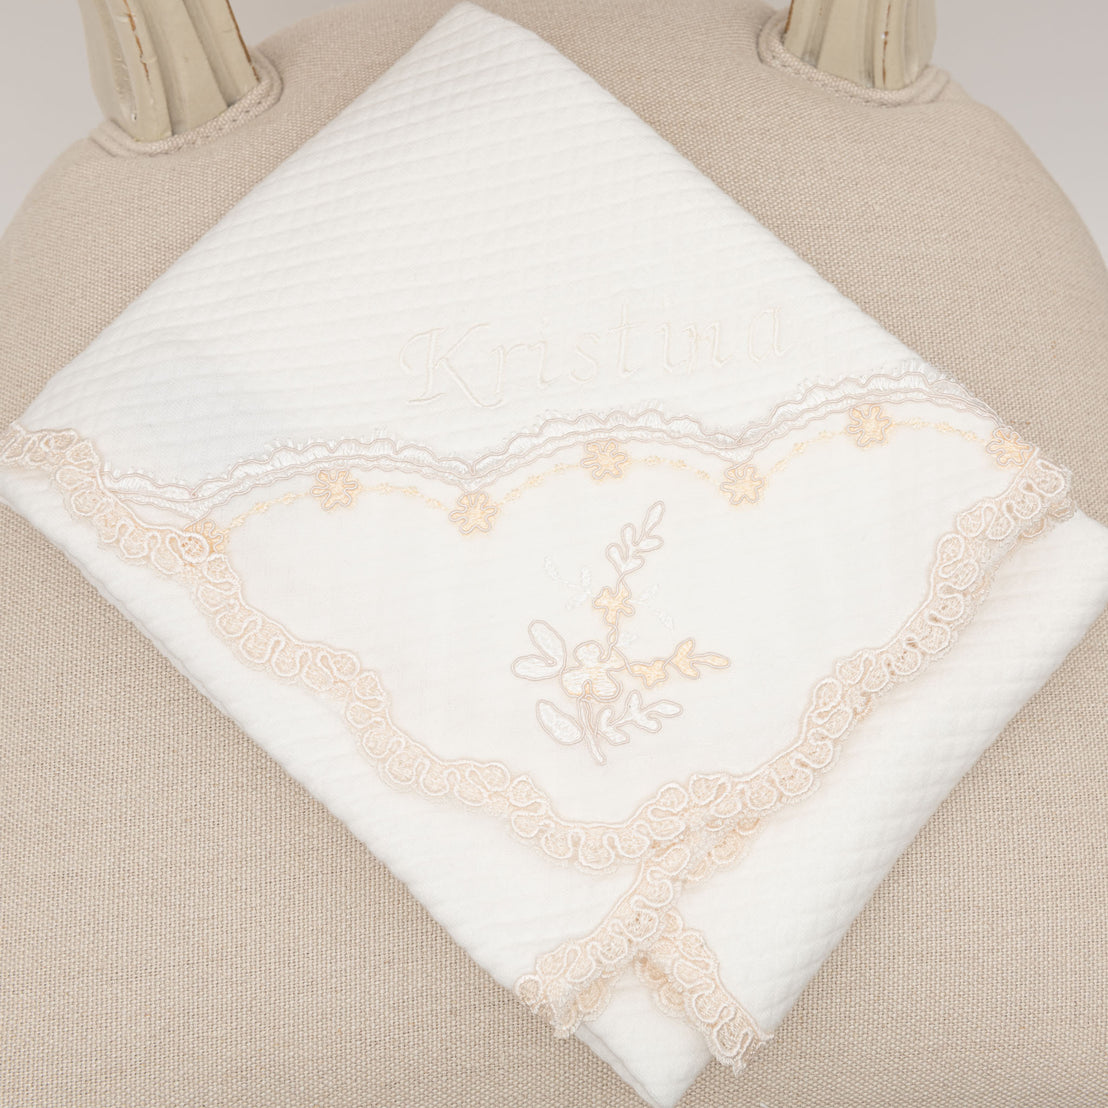 A close-up of a Kristina Blanket embroidered with the name "kristina" and destined to become an heirloom, surrounded by a lace heart, featuring a delicate floral design.